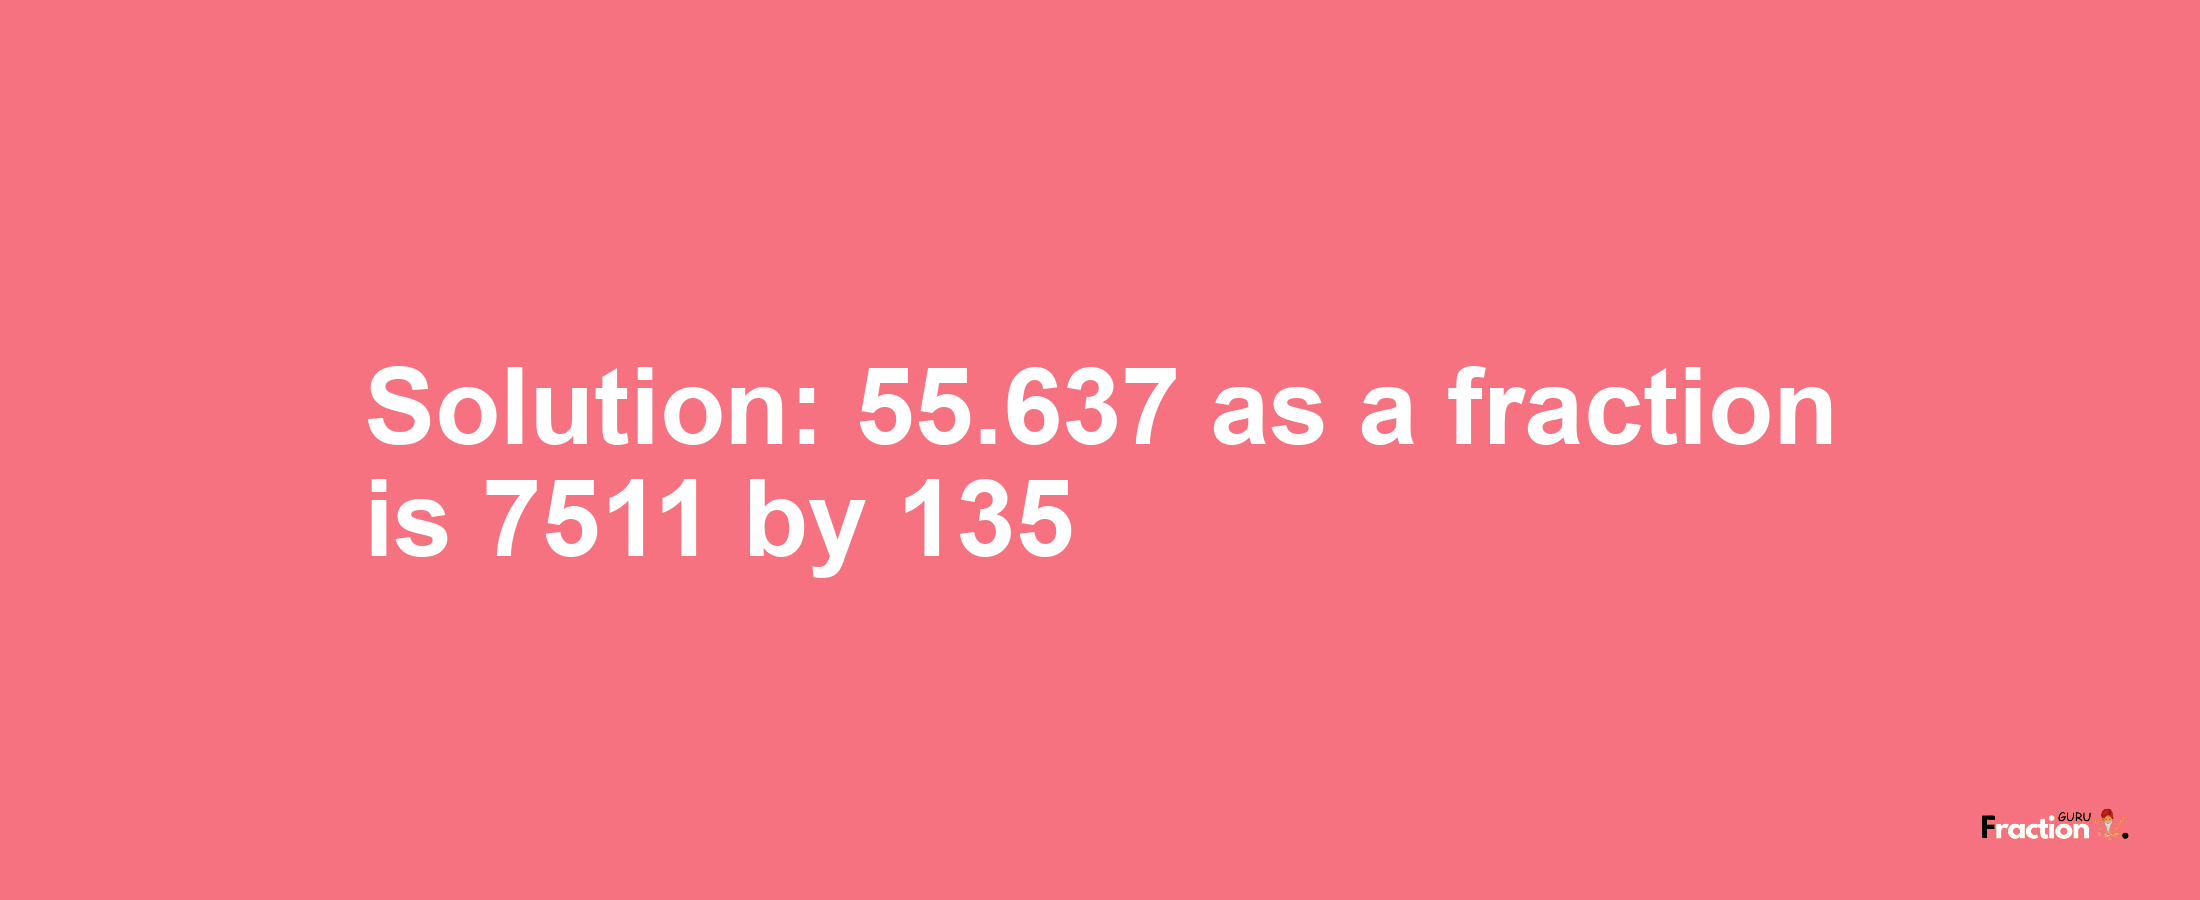 Solution:55.637 as a fraction is 7511/135